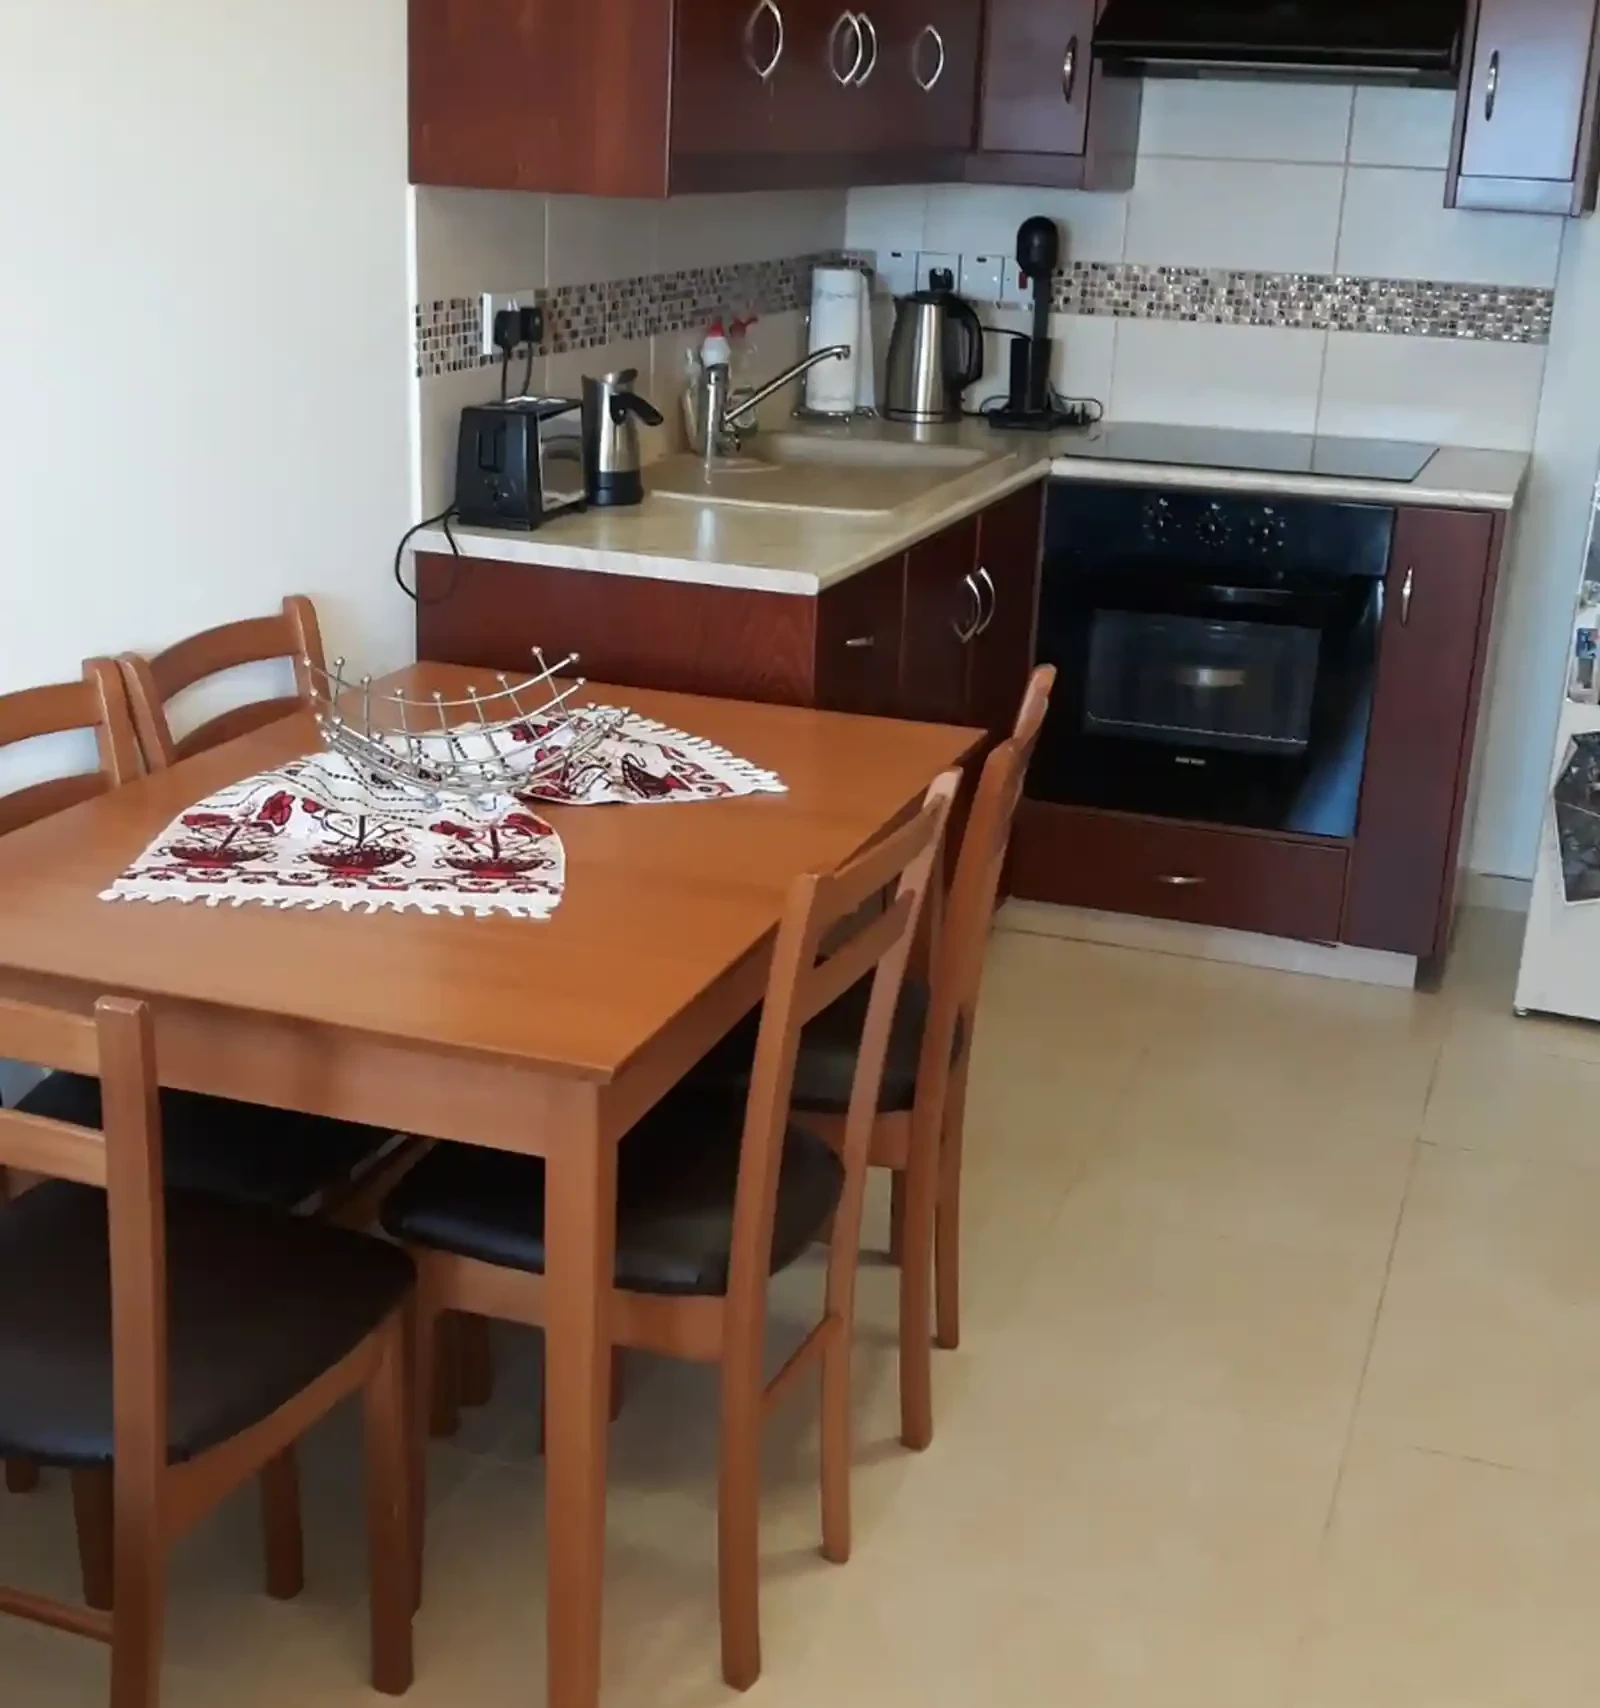 1-bedroom apartment fоr sаle €70.000, image 1